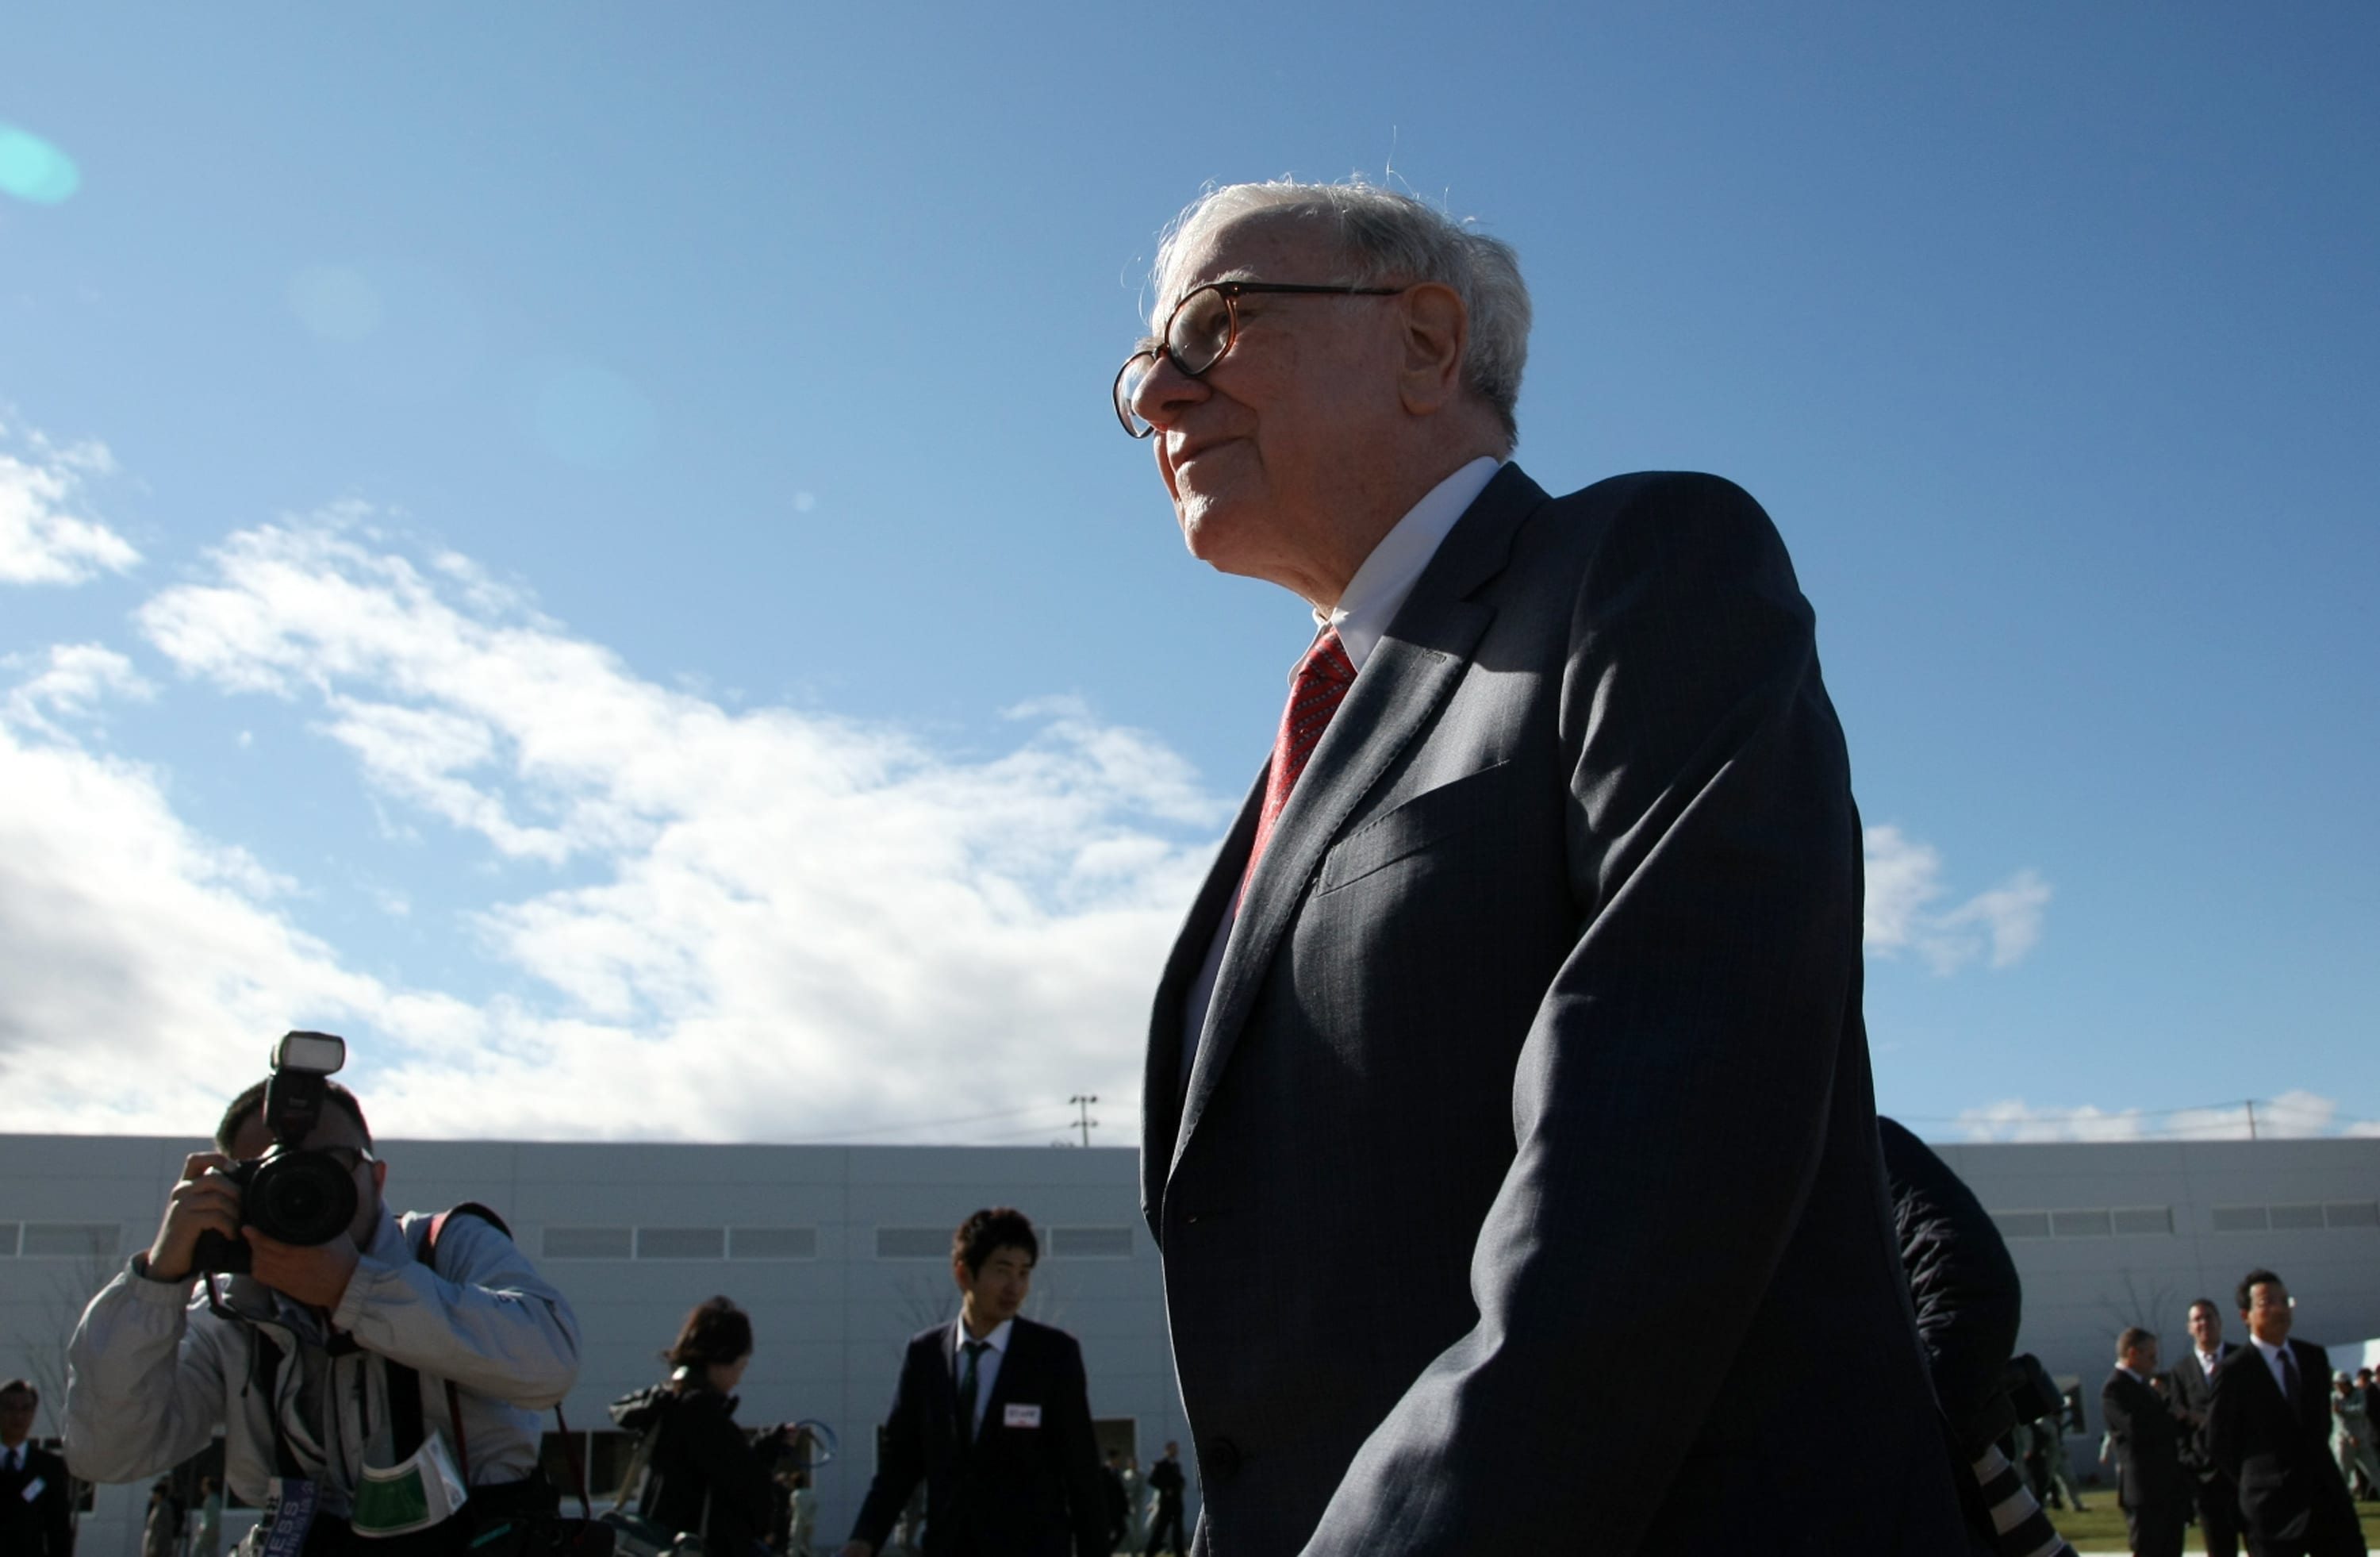 Warren Buffett’s trip is a ‘stamp of approval’ for investing in Japan